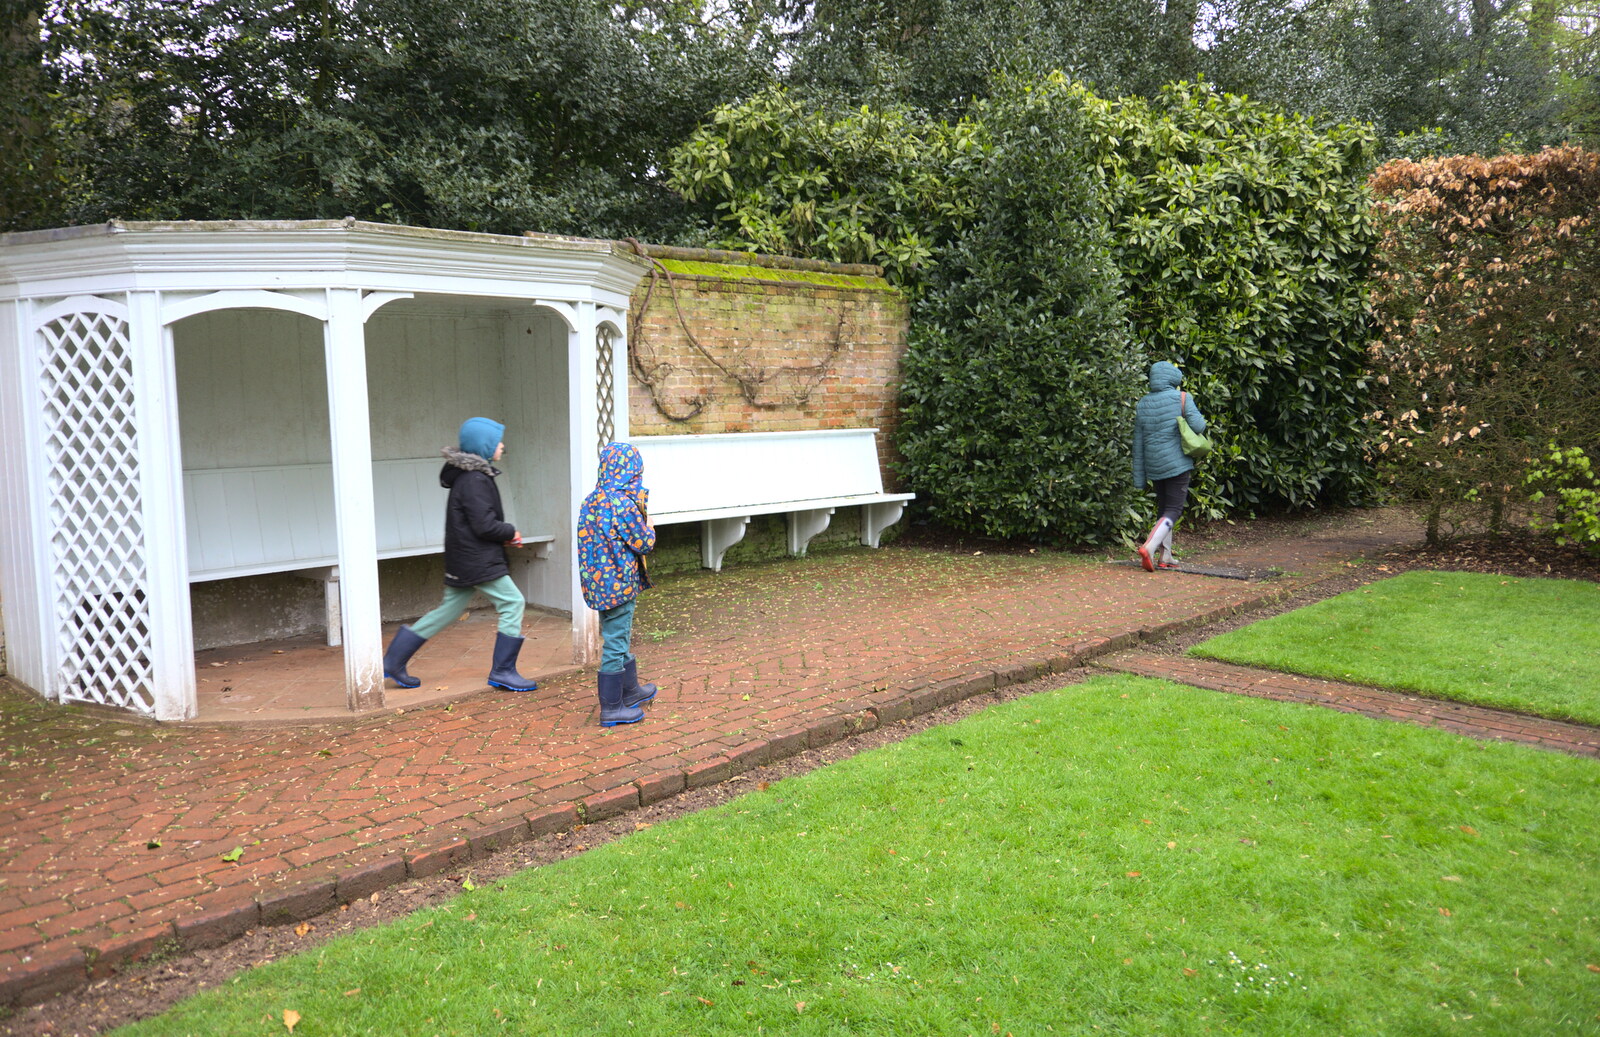 We visit a garden shelter from A Trip to Blickling Hall, Aylsham, Norfolk - 29th April 2018